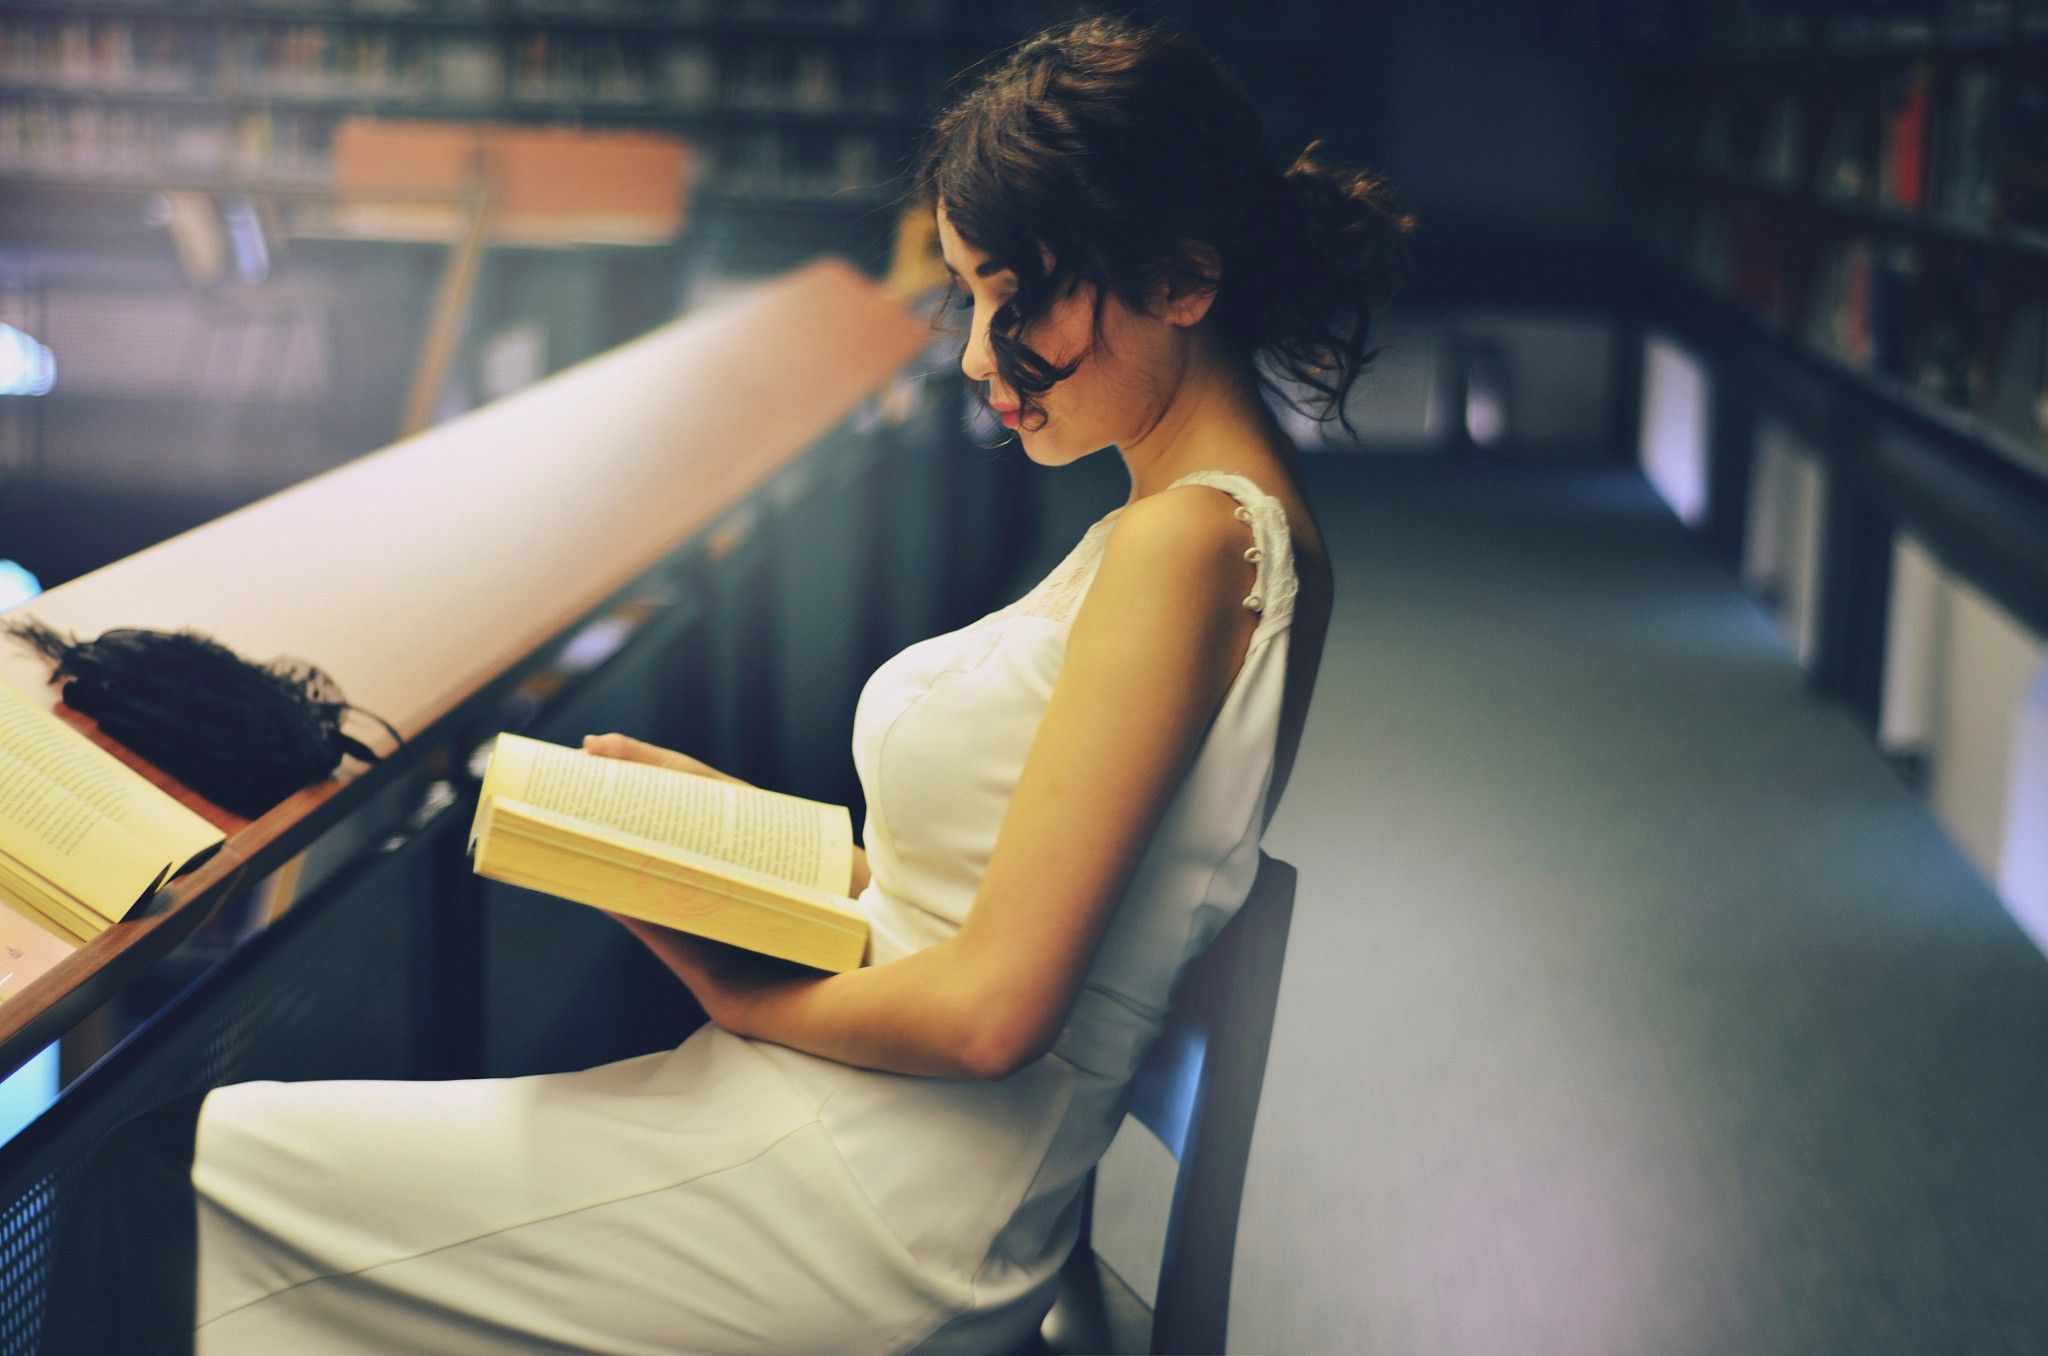 Wallpaper, women, model, brunette, glasses, sitting, white dress, photography, books, reading, fashion, hair in face, Person, girl, beauty, woman, lady, human positions, photo shoot 2048x1356